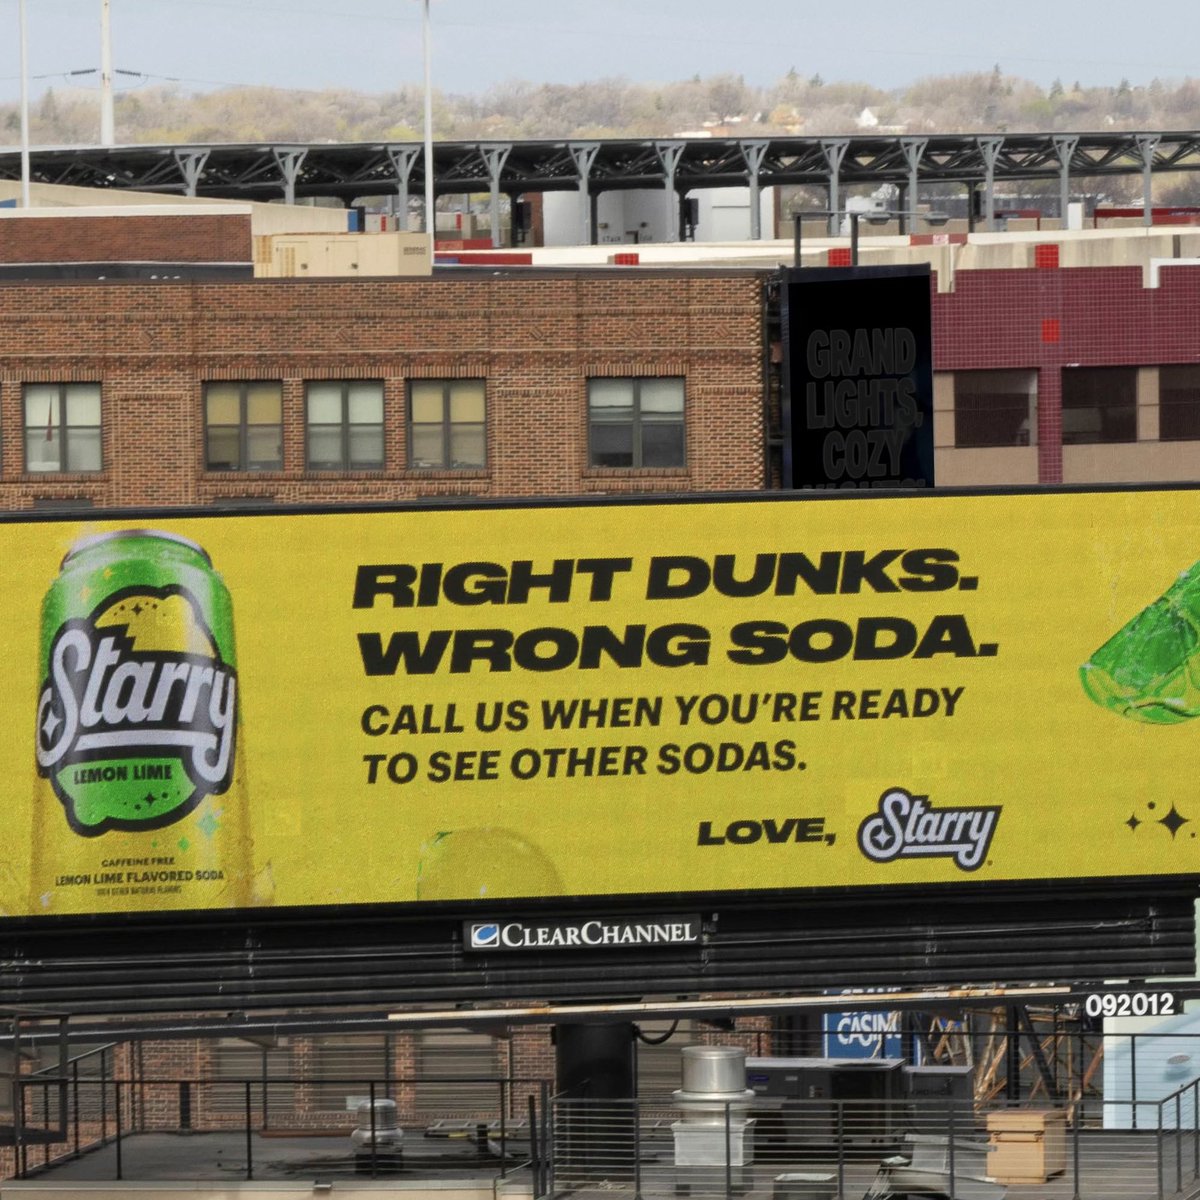 “Right dunks. Wrong soda.” Ahead of tonight’s Wolves/Suns playoff game, @starrylemonlime has placed several billboards directly across from the Target Center, just days after Anthony Edwards started a campaign with a rival lemon-lime soda brand. Carbonated rivalry growing? 👀